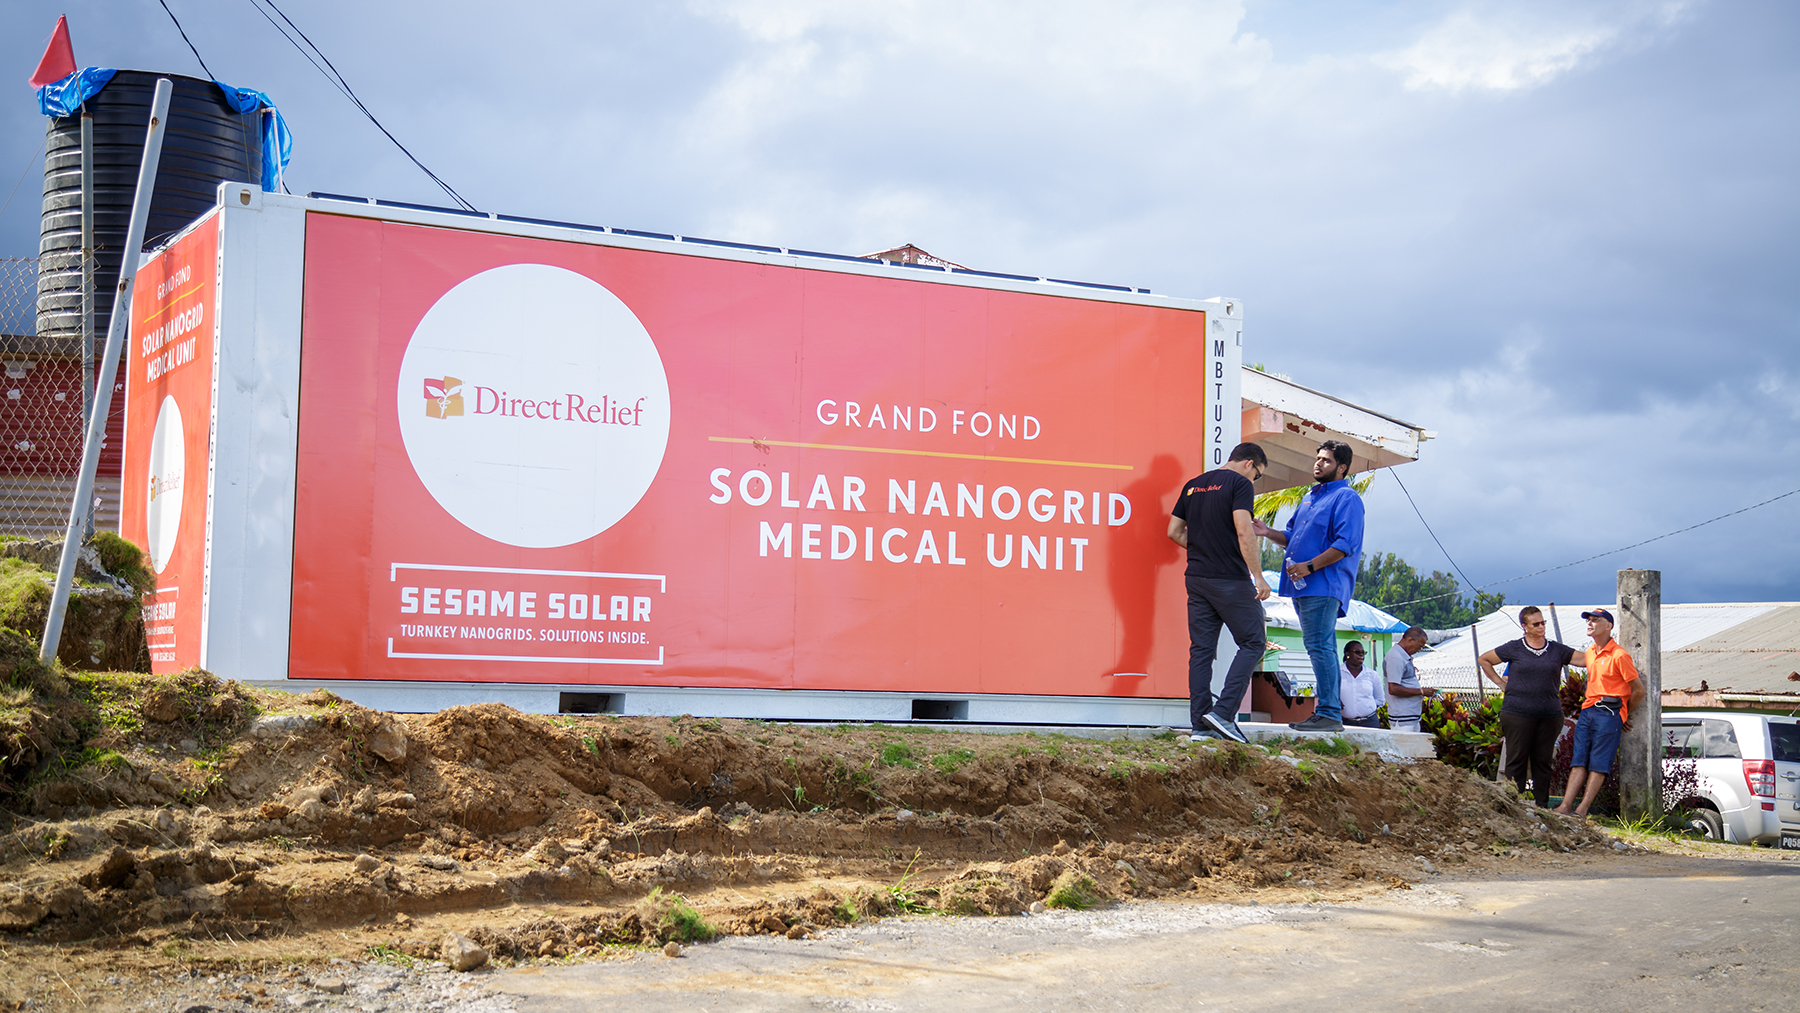 A solar nanogrid is unveiled in Grand Fond, Dominica, on Oct. 4, 2019. The nanogrid provides emergency power, water purification and refrigerated storage for medicines like vaccines. (Photo by Chad Ambo for Direct Relief)